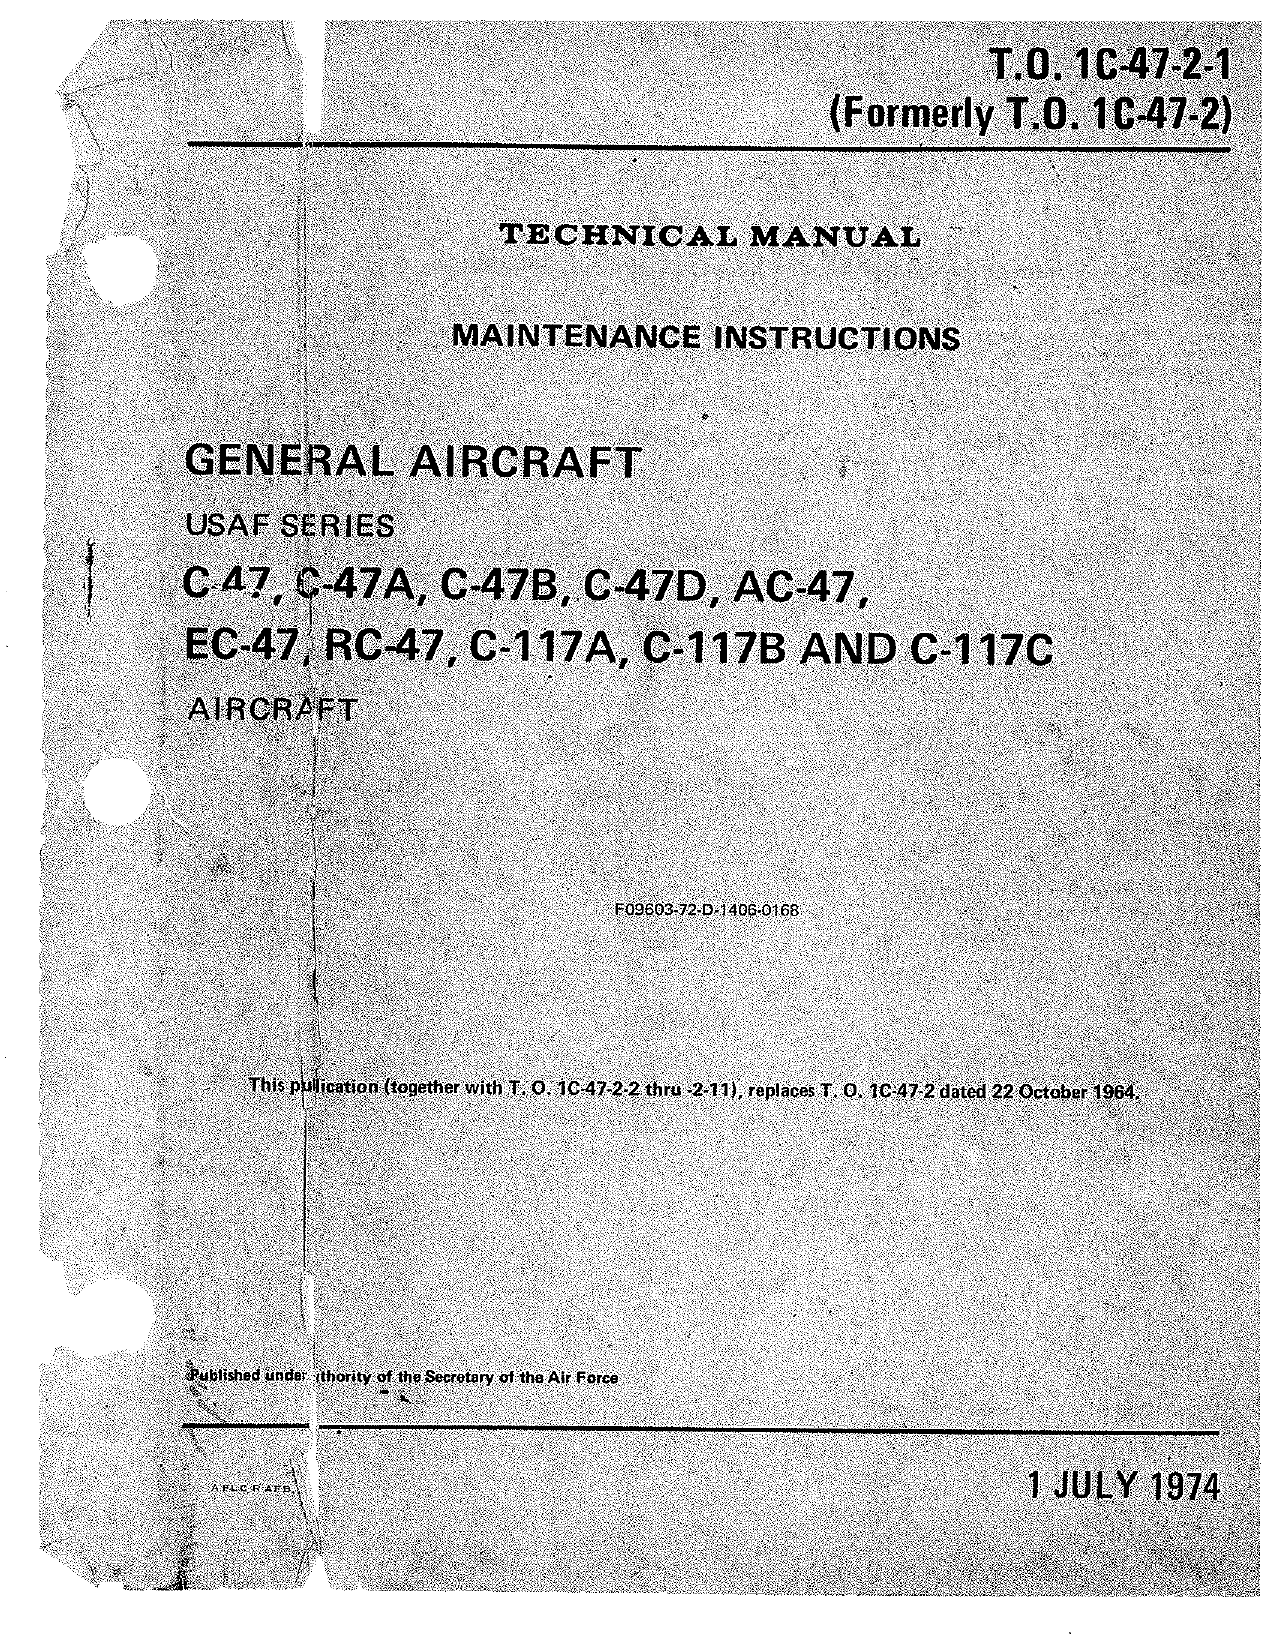 Sample page 1 from AirCorps Library document: Maintenance Instructions for C-47, C-47A, C-47B, C-47D, AC-47, EC-47, RC-47, C-117A, C-117B, and C-117C